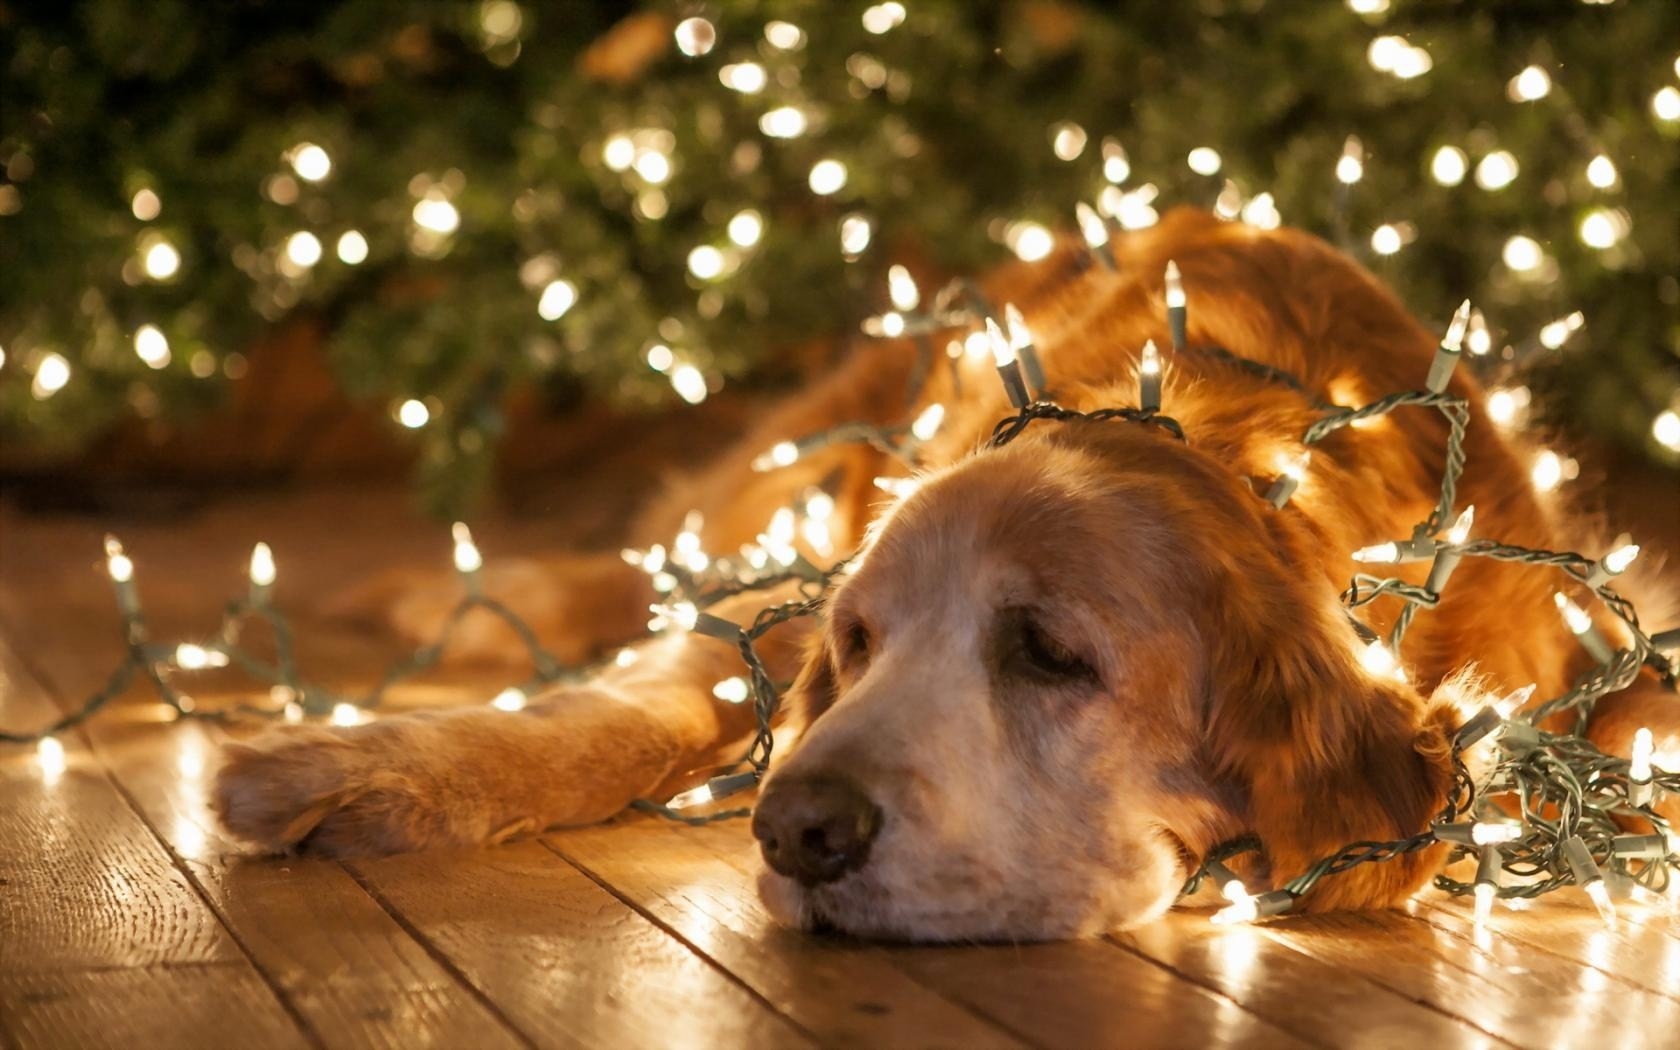 animals dogs christmas lights High Quality Wallpaper, High Definition Wallpaper